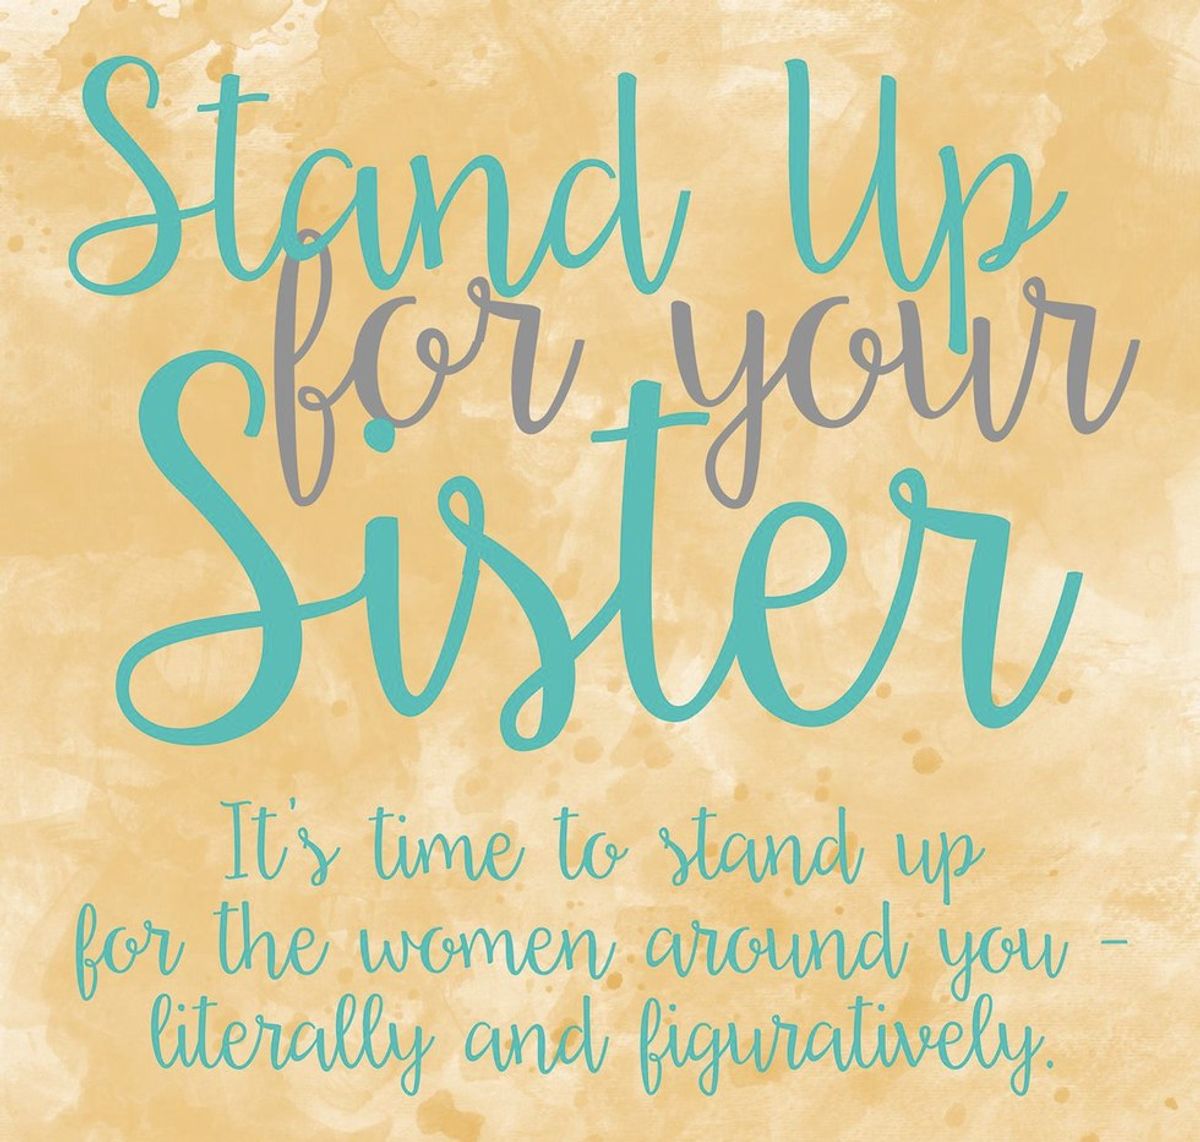 Stand Up For Your Sister